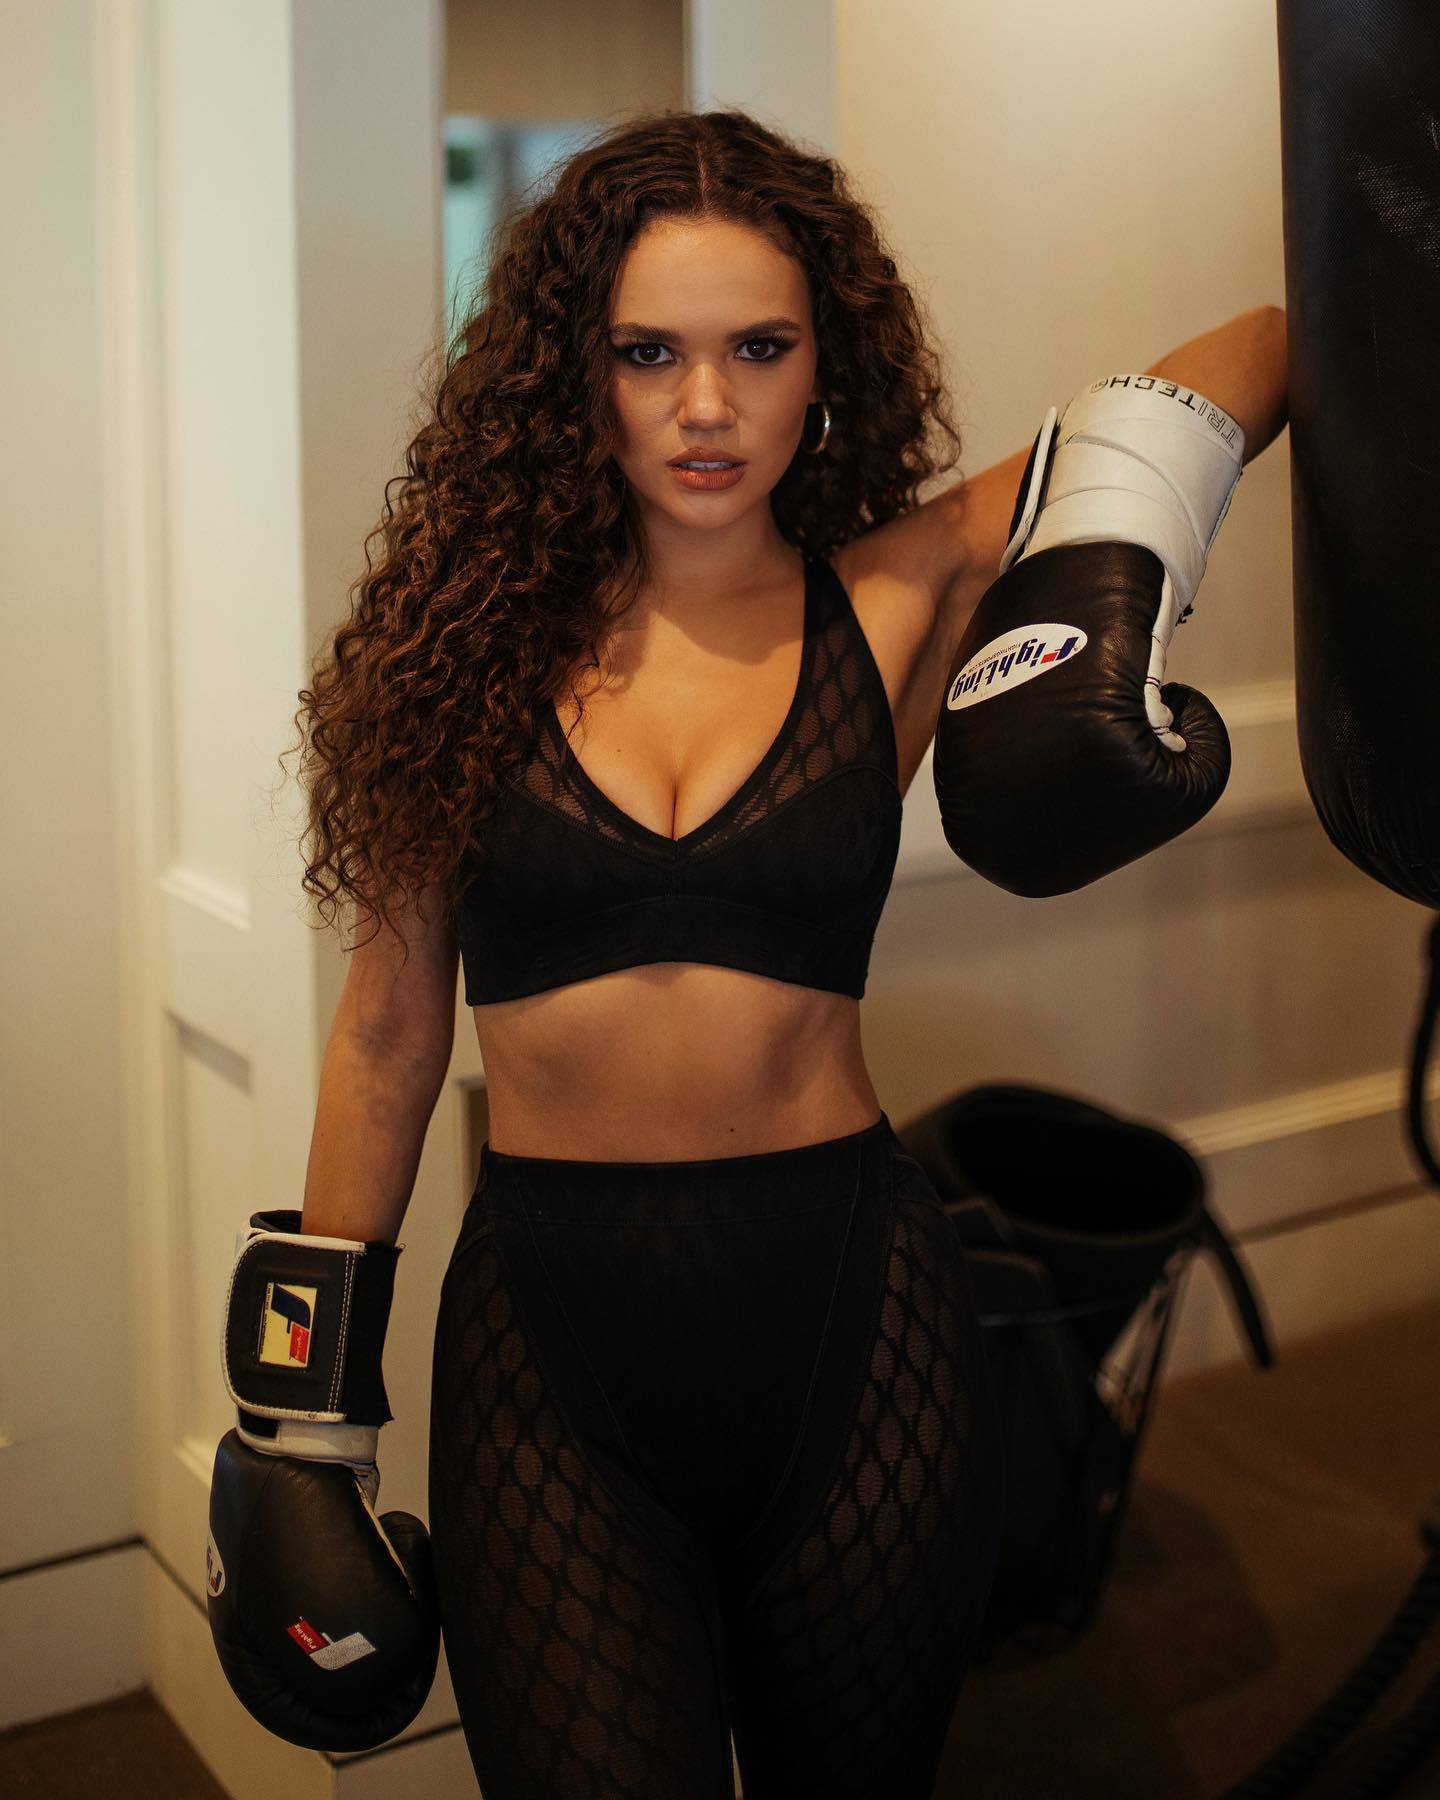 Madison Pettis Hits The Gym in Style! - Photo 3